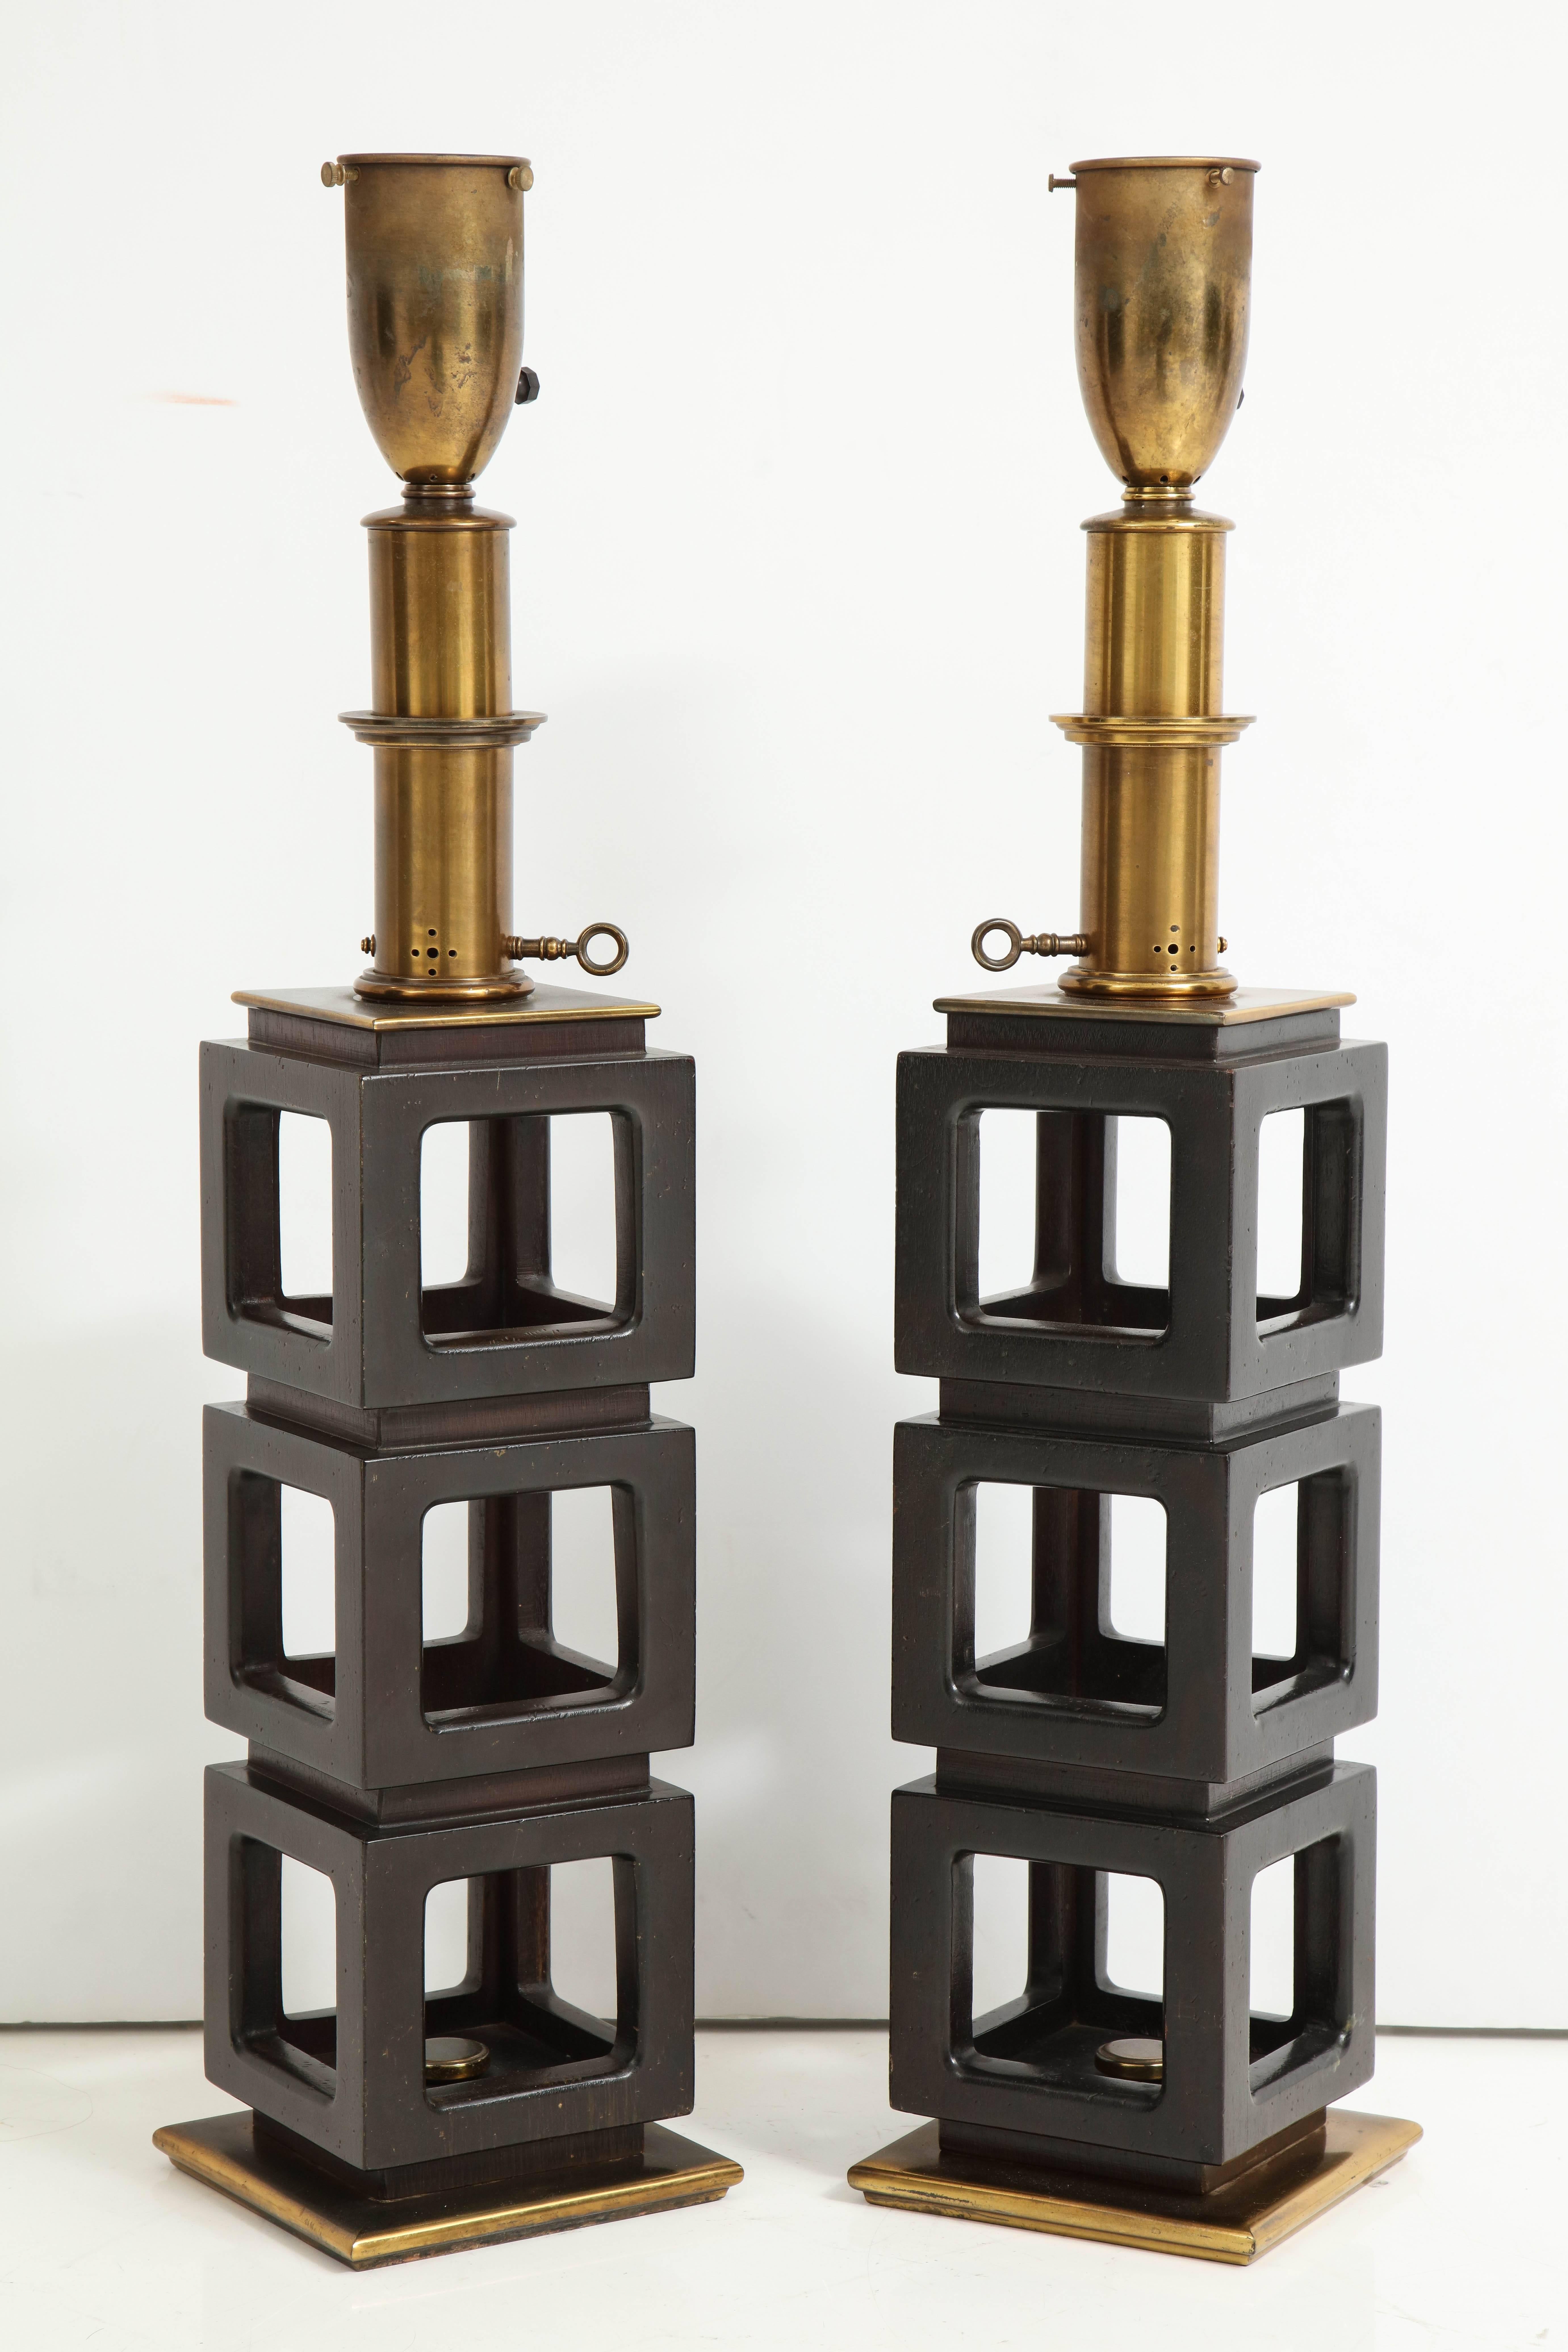 Large pair of stacked cubes lamps by Steiffel, Mahogany body on brass base with original fitting. Can be custom rewired on request.
Sold as a pair.